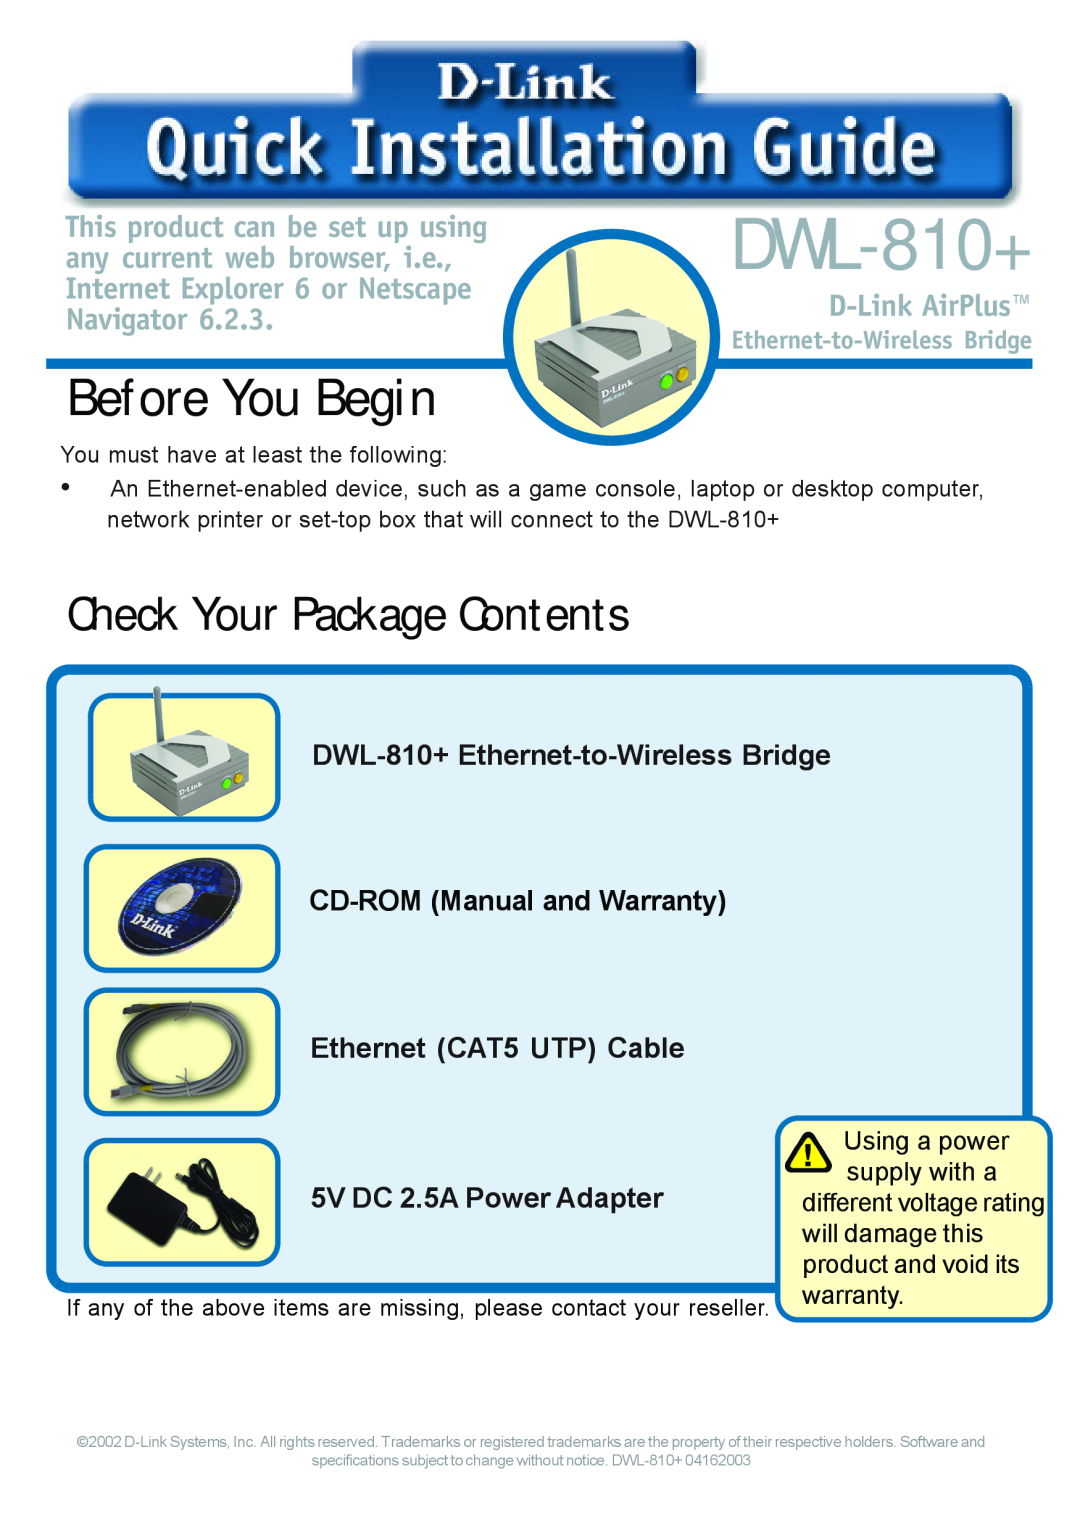 D-Link DWL-810+ manual Before You Begin, Check Your Package Contents, Ethernet CAT5 UTP Cable, D-Link AirPlus 